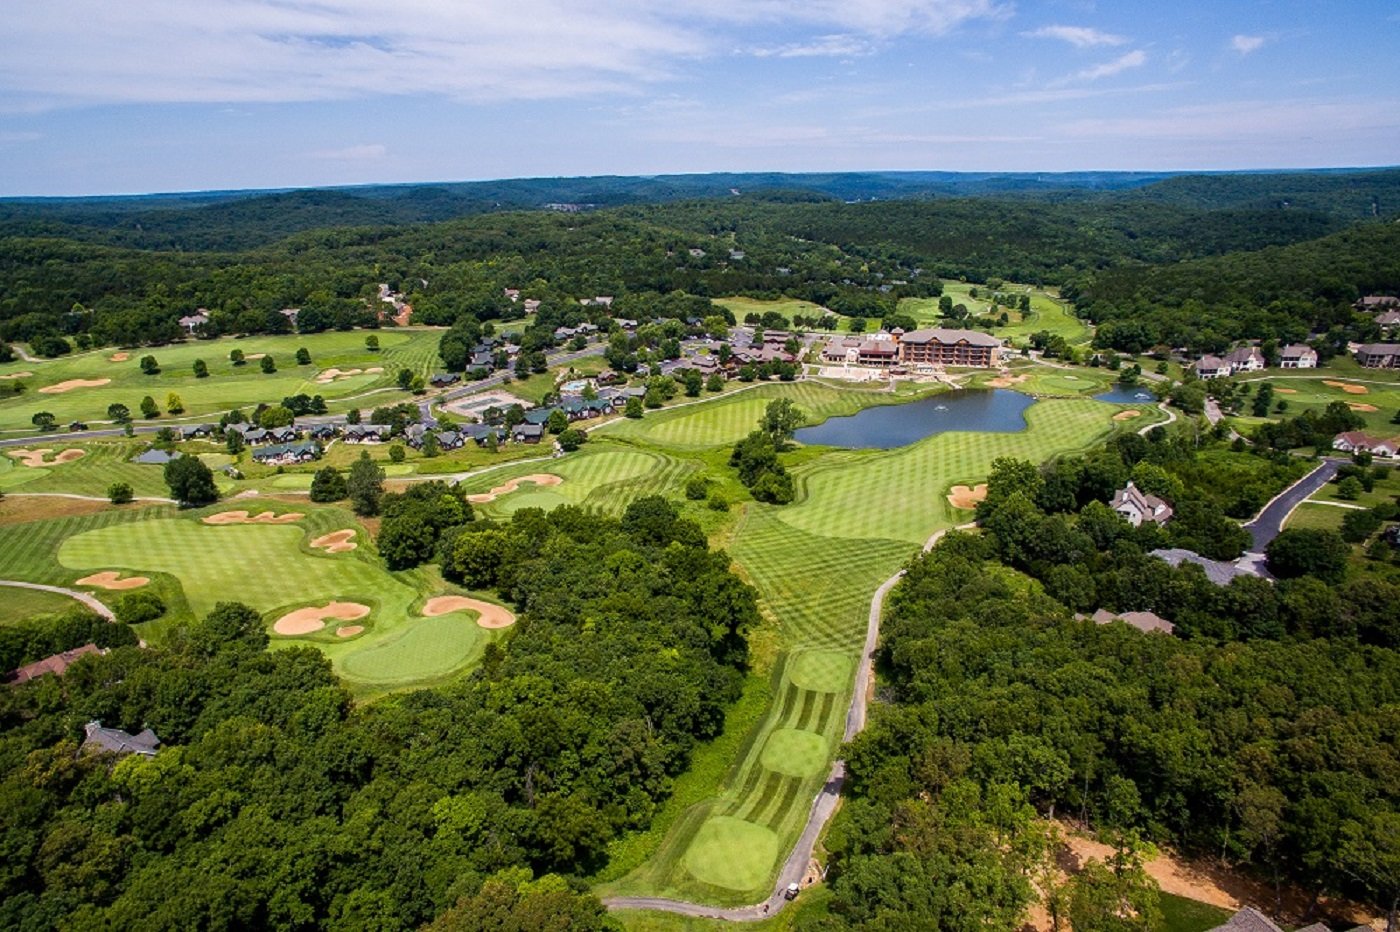 Highest-rated golf courses in Missouri, according to Tripadvisor